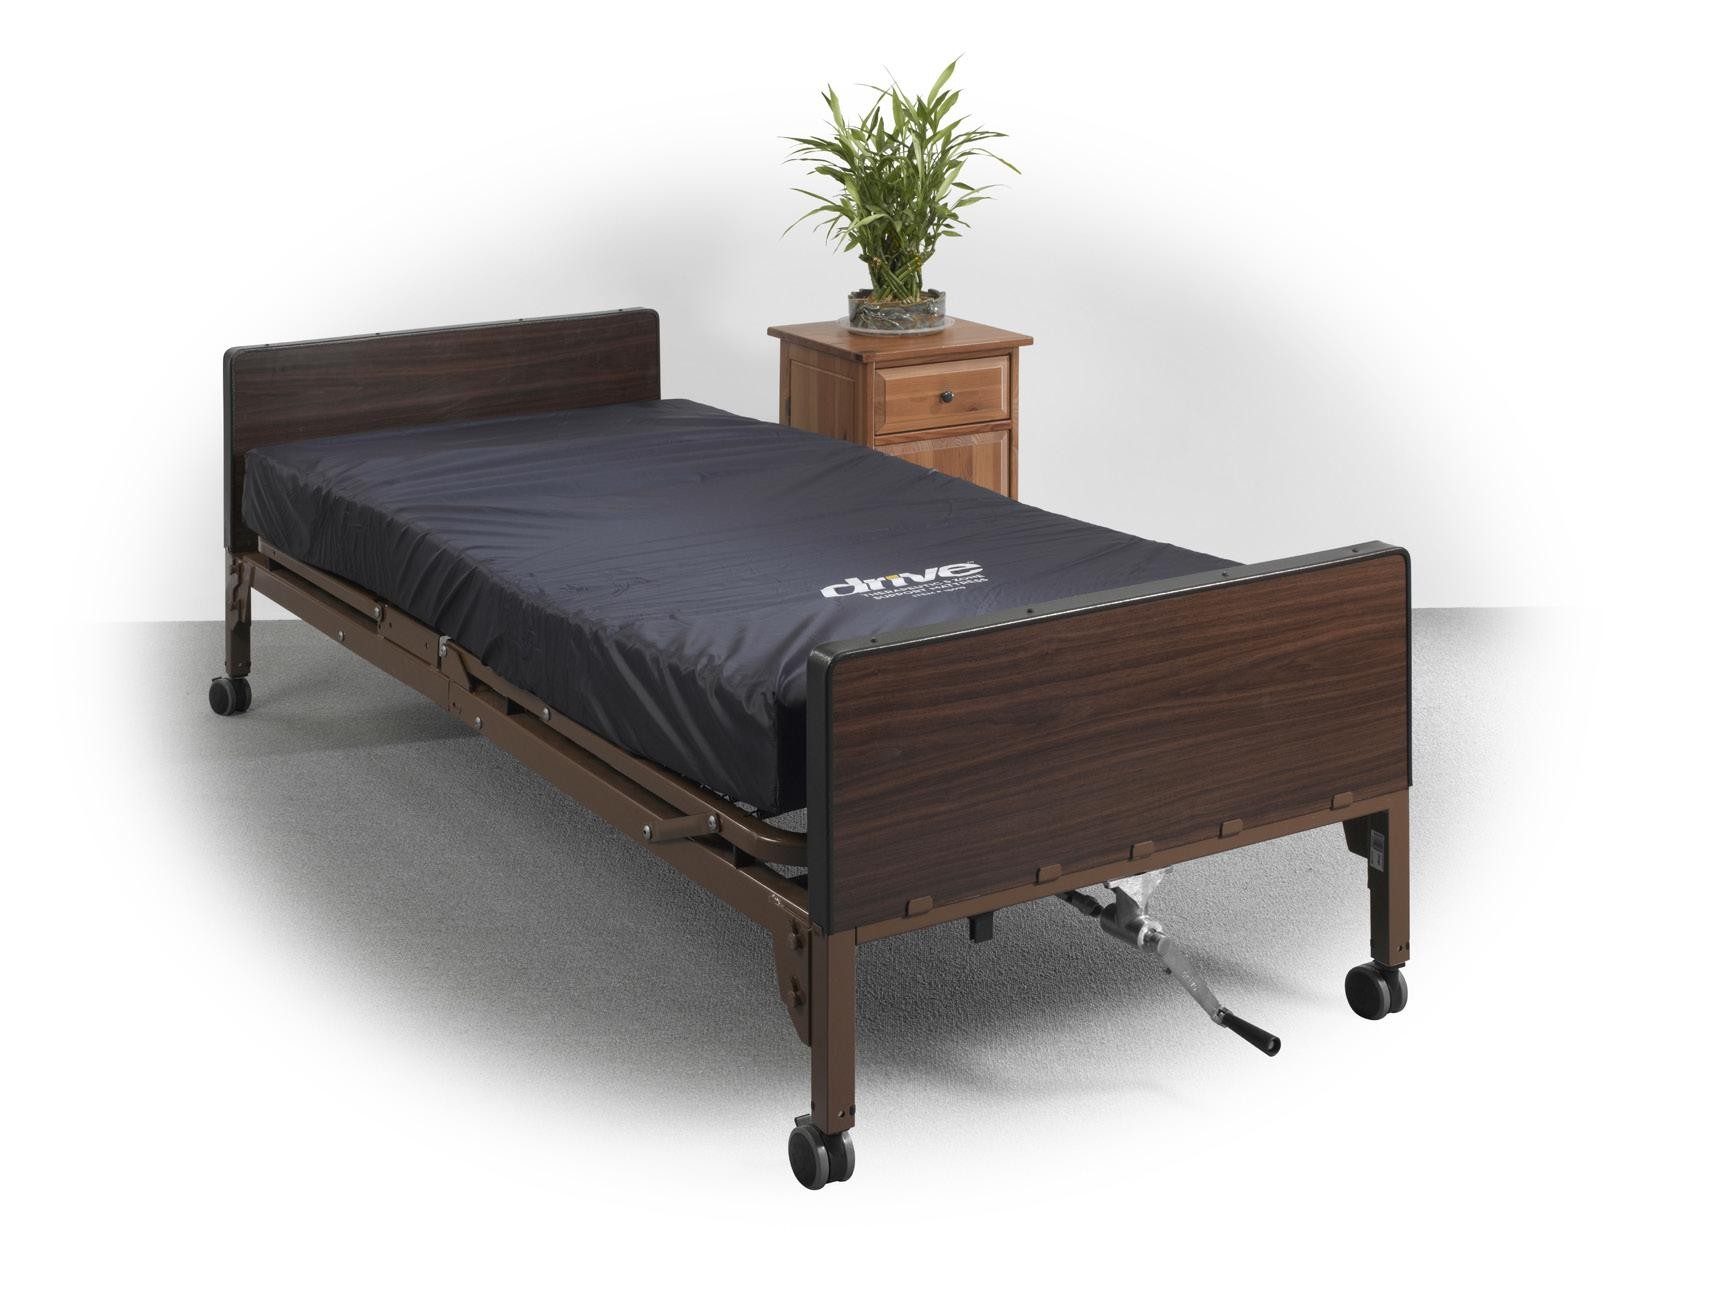 THERAPEUTIC 5-ZONE SUPPORT MATTRESS ON BED